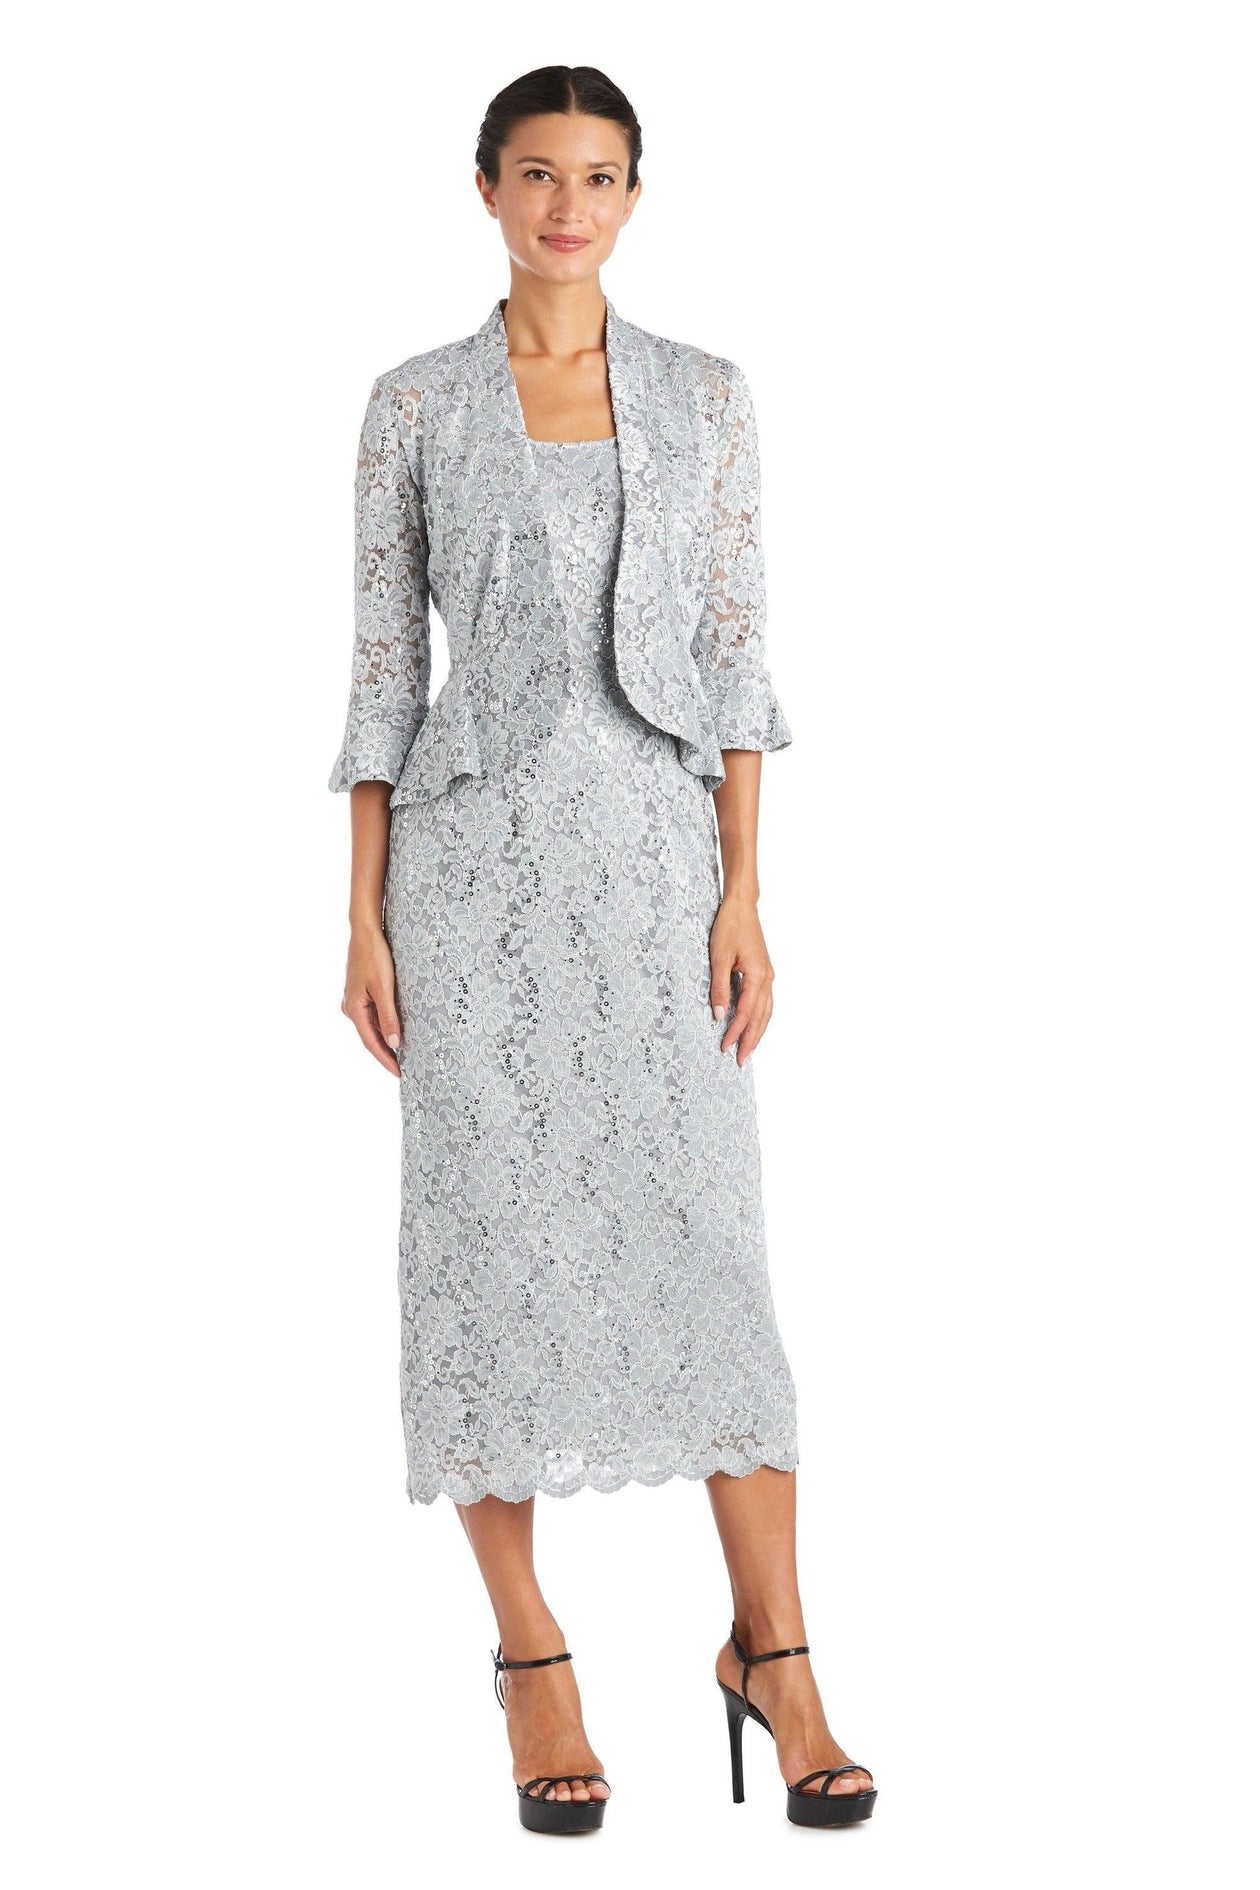 Champagne R&M Richards 9896 Long Mother Of The Bride Jacket Dress